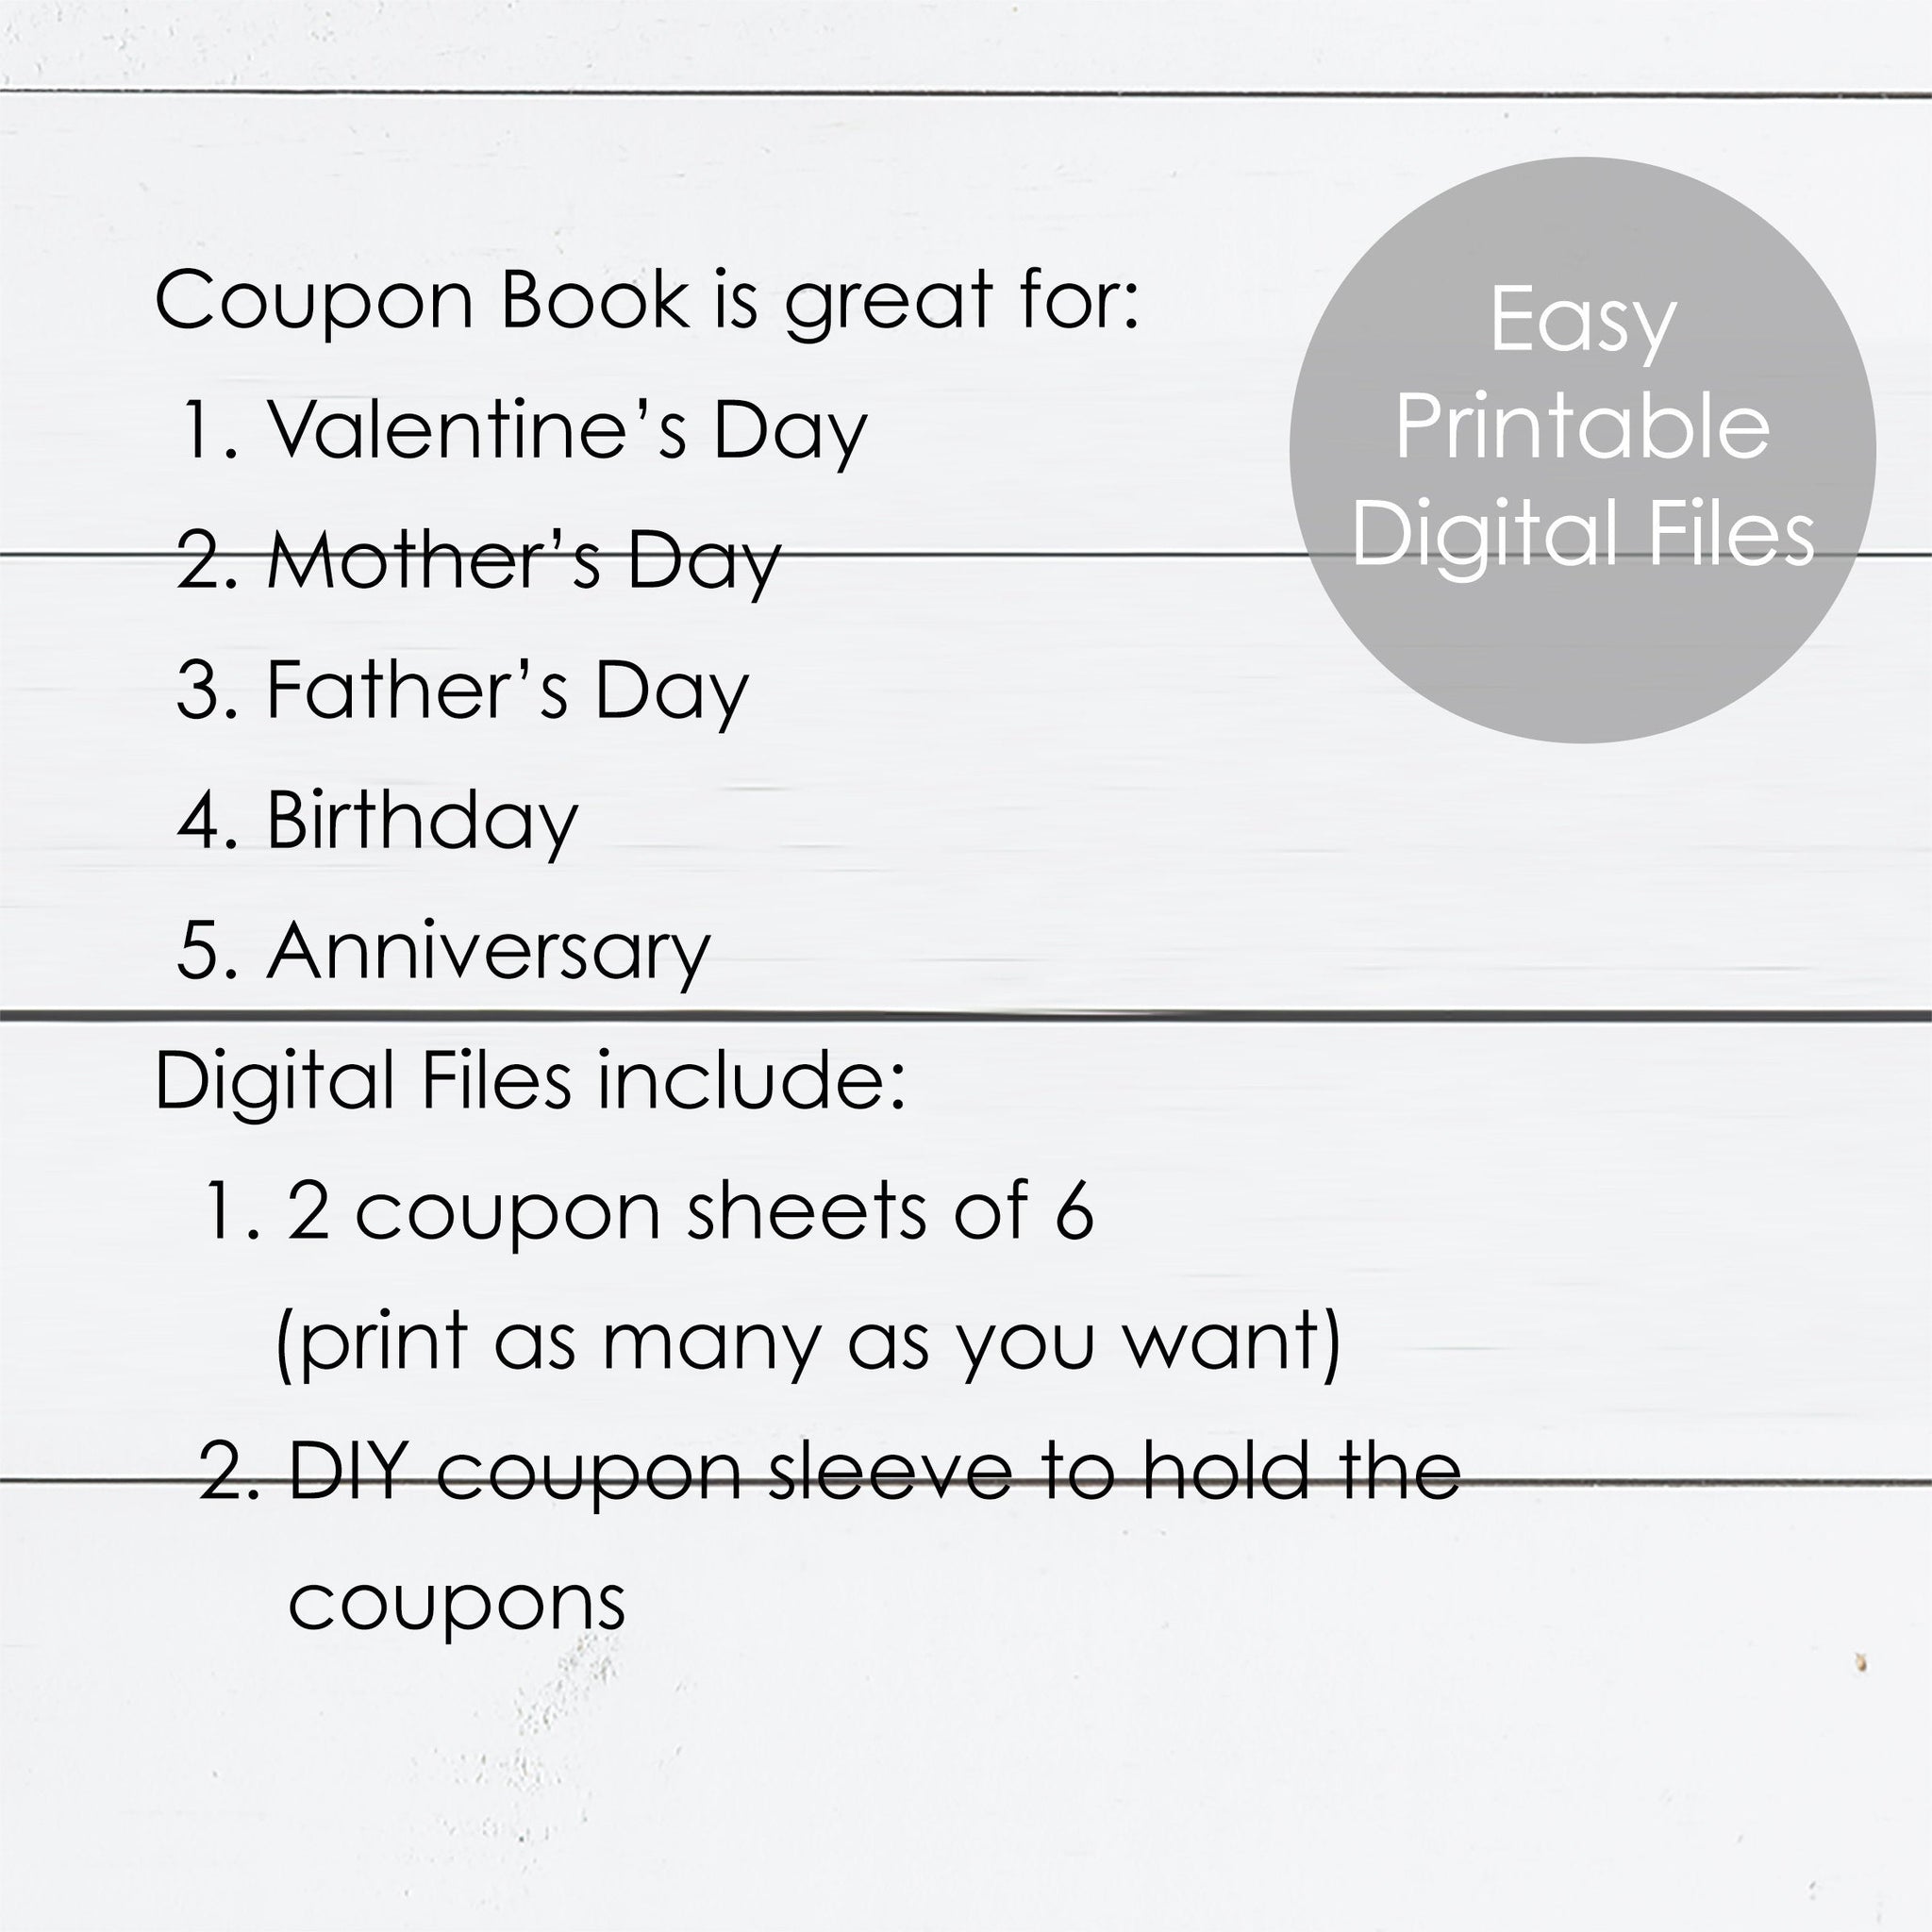 printable love coupons black and white